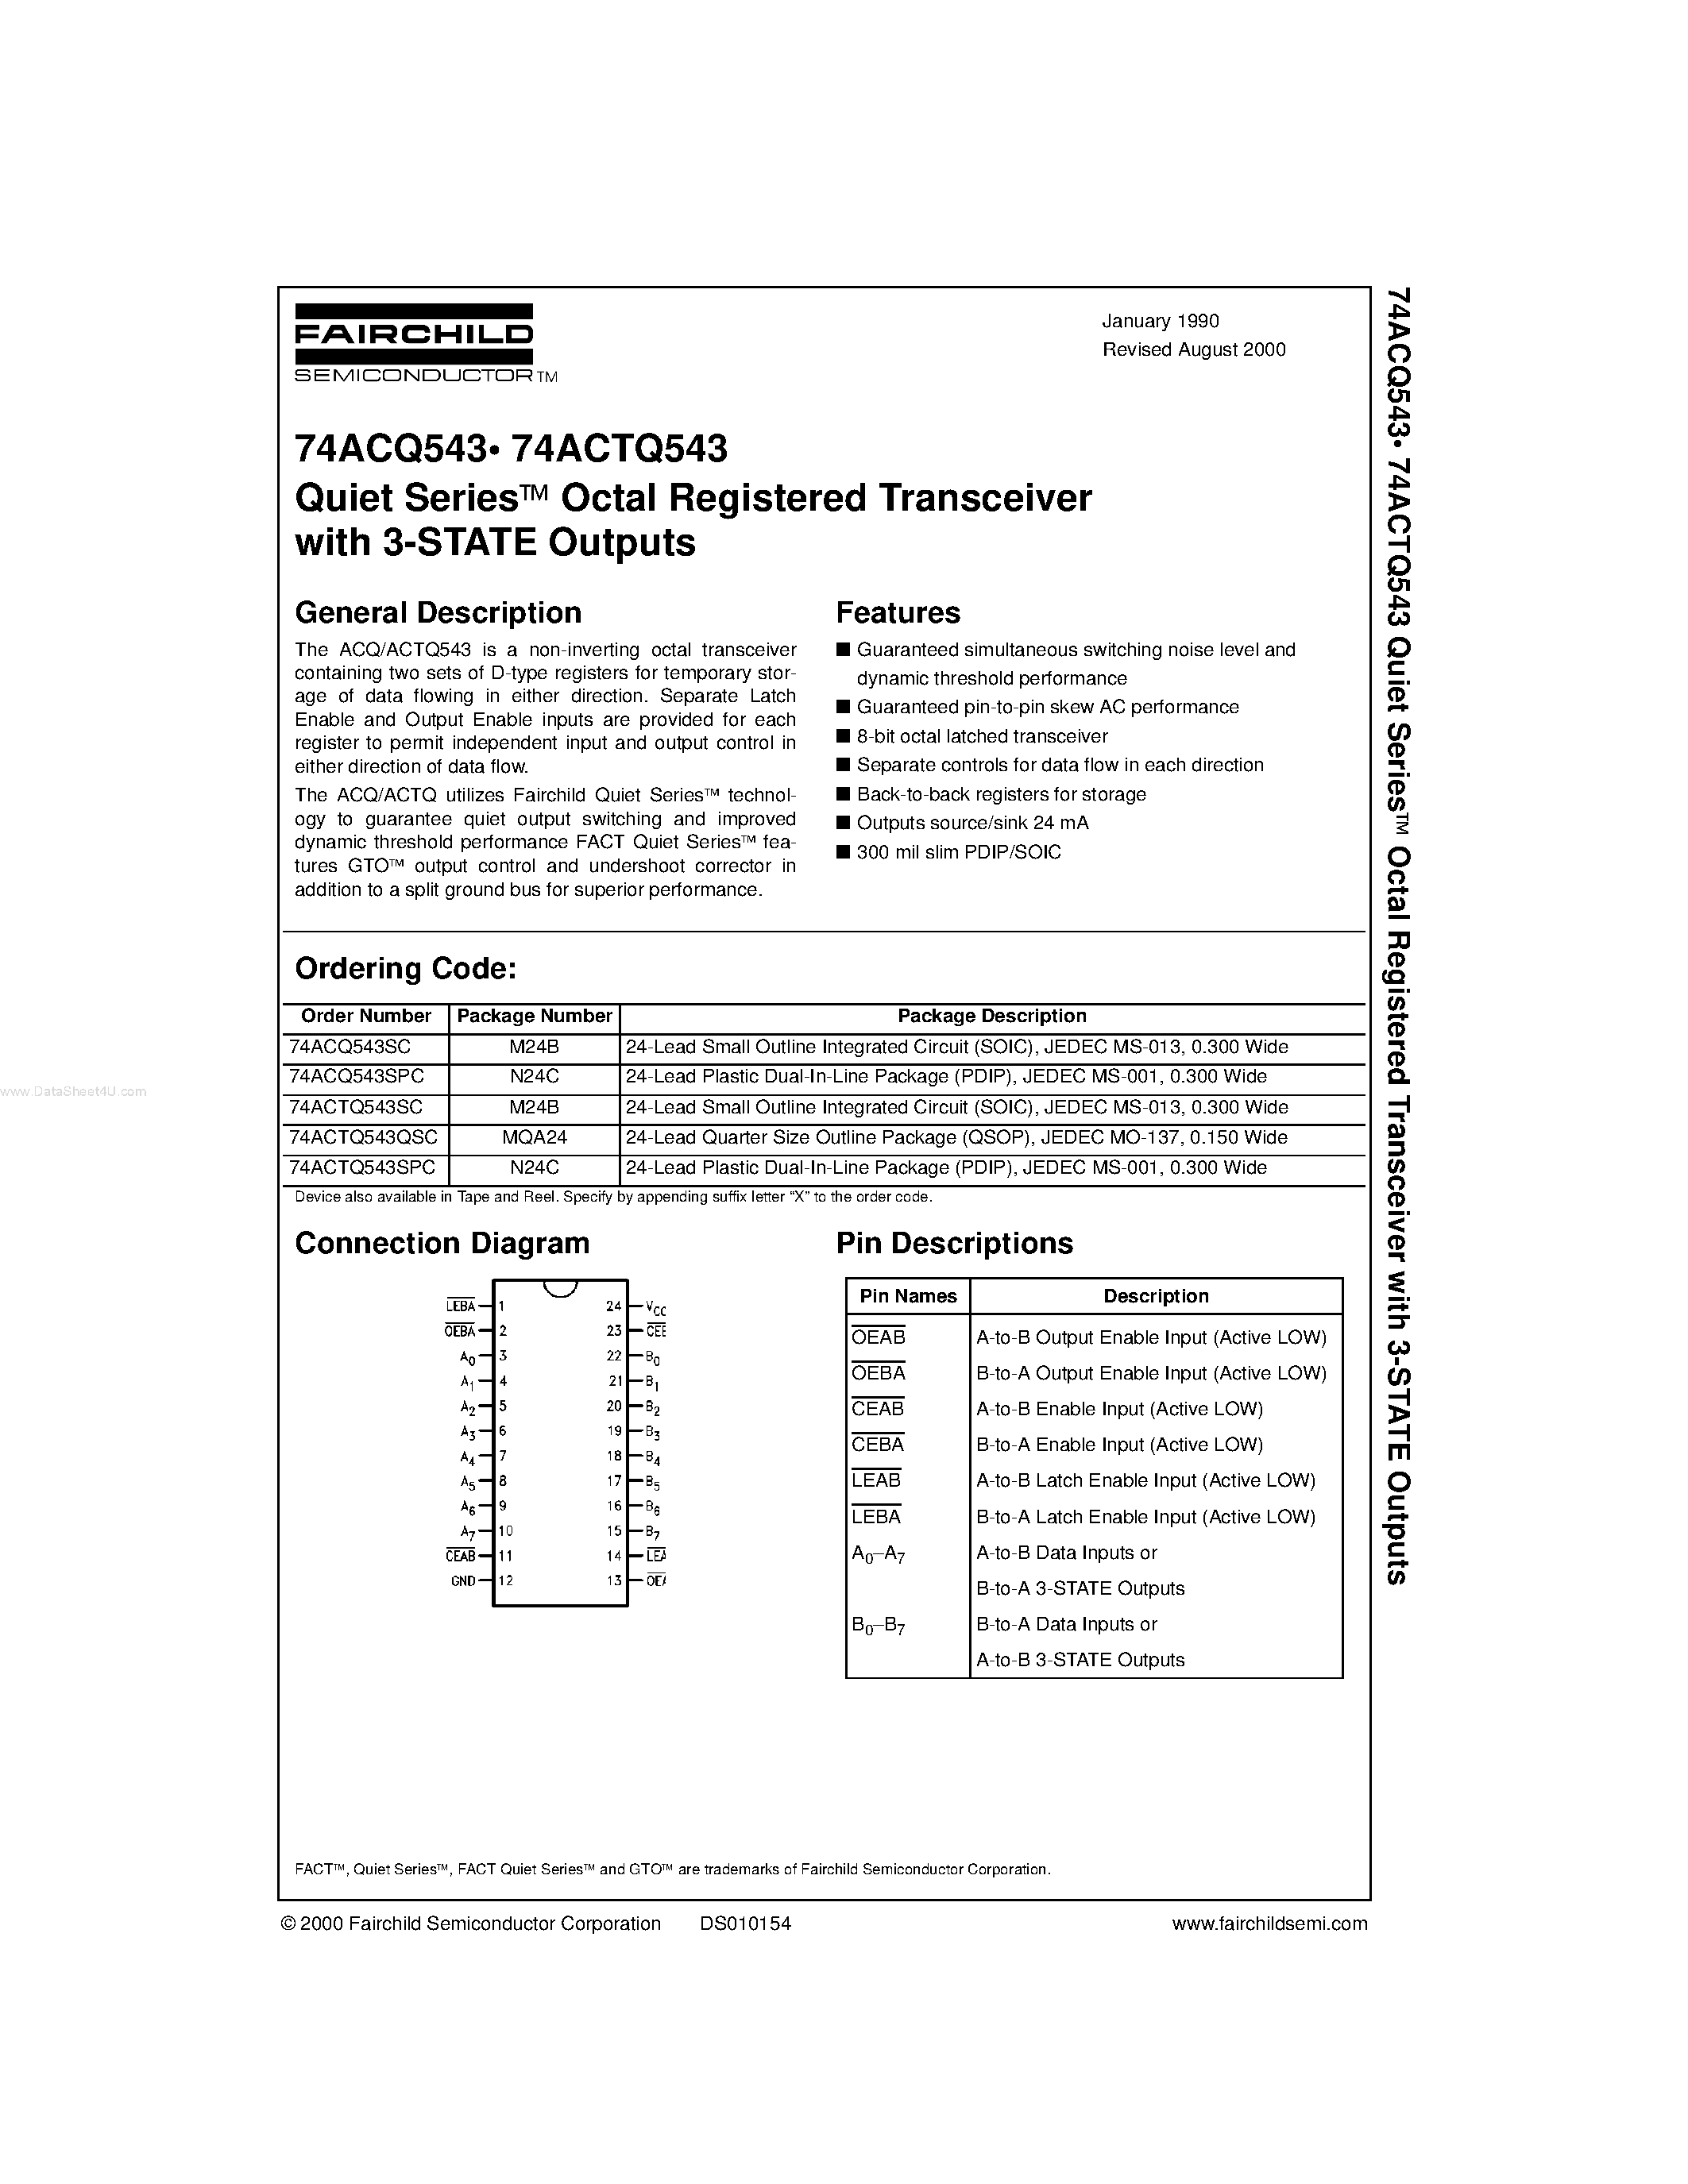 Datasheet 74ACQ543 - Quiet Series Octal Registered Transceiver with 3-STATE Outputs page 1